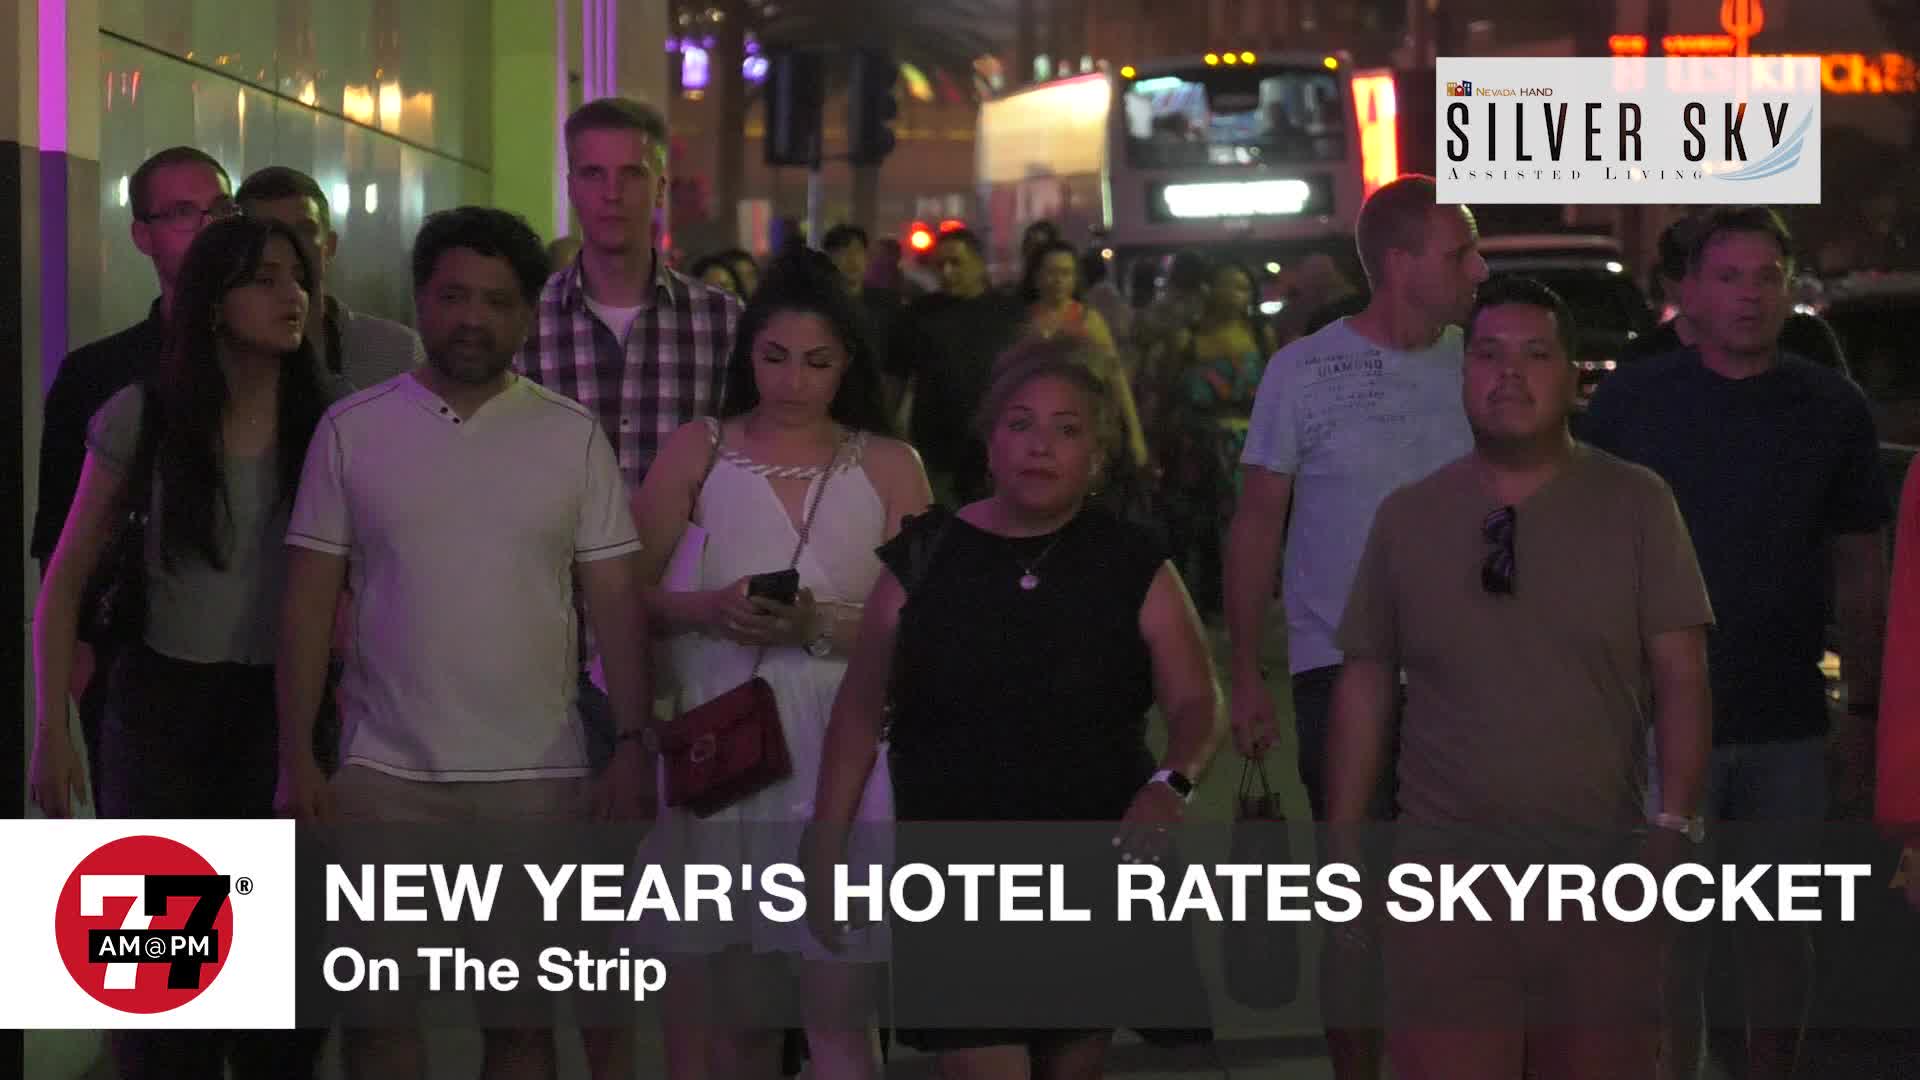 New Years room rates three times higher than Christmas